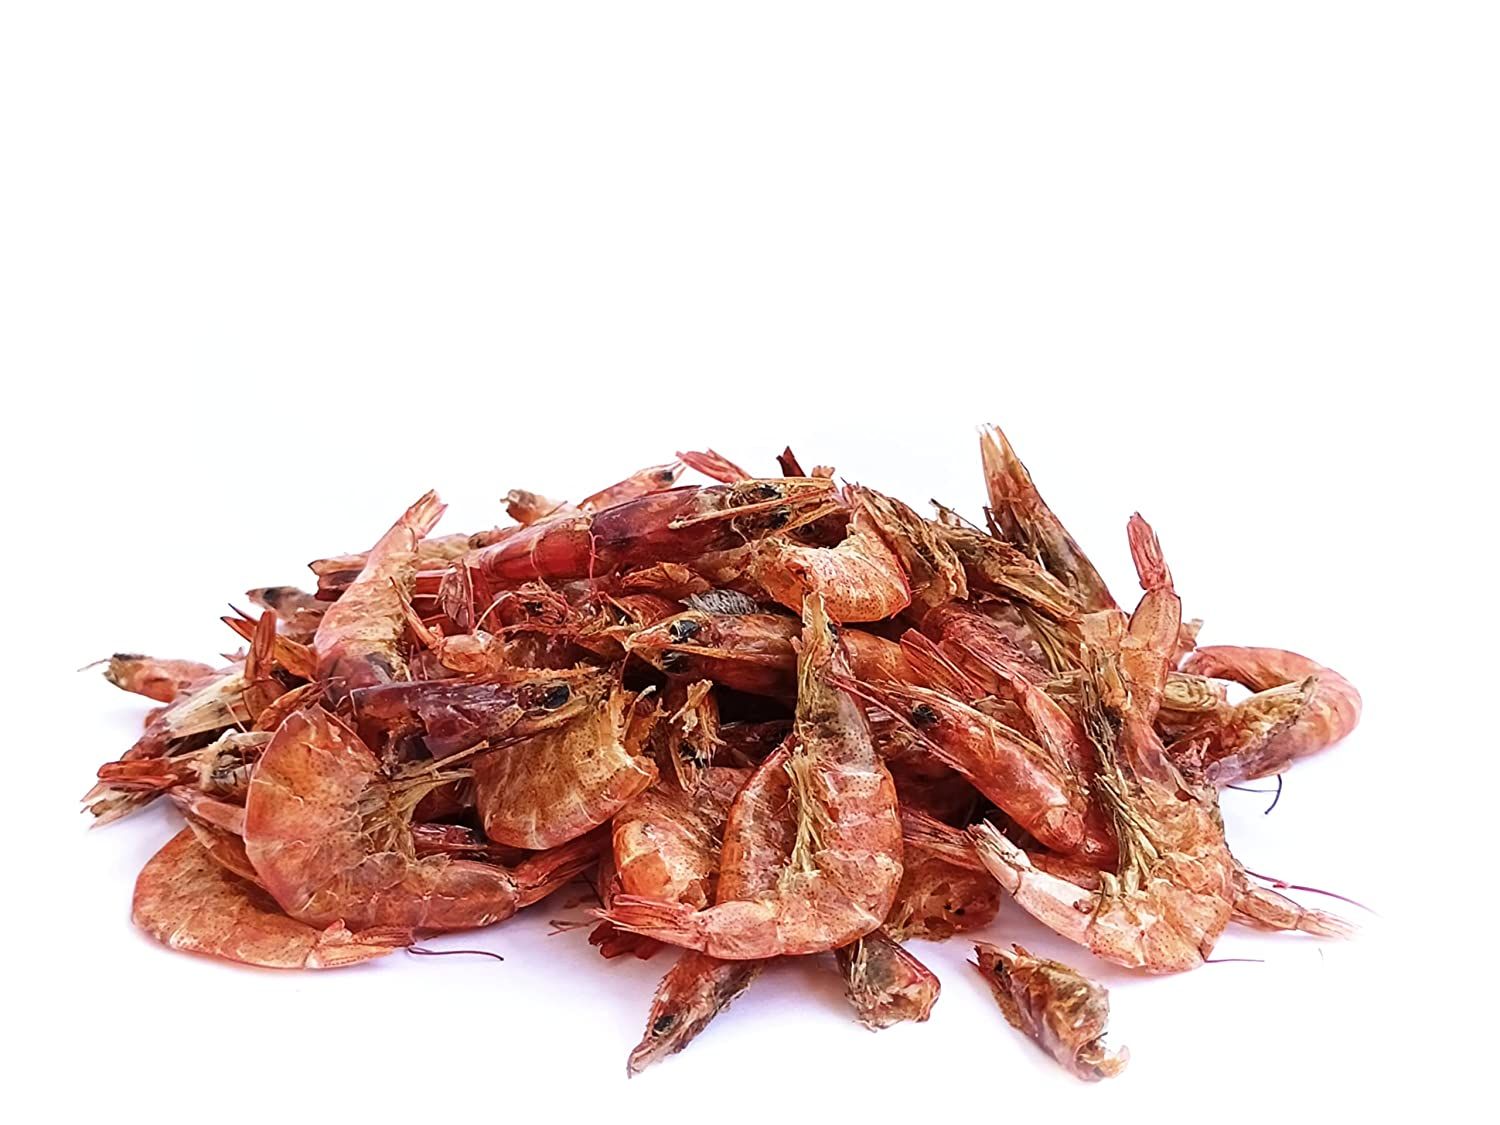 Click To Eat Dry Fish Image